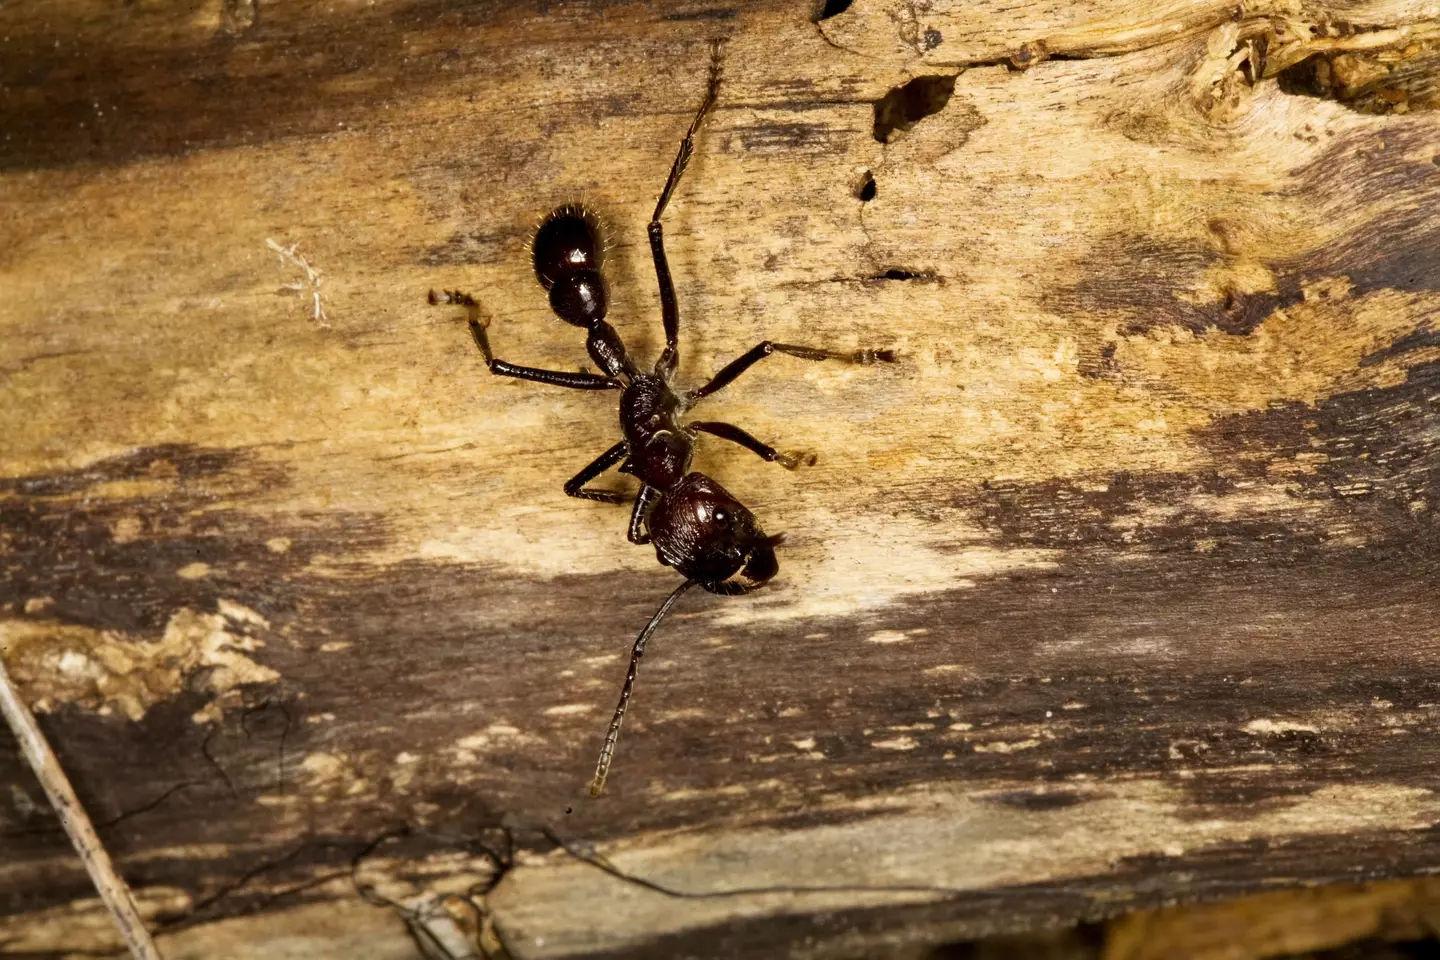 The Bullet Ant has one of the most painful stings.